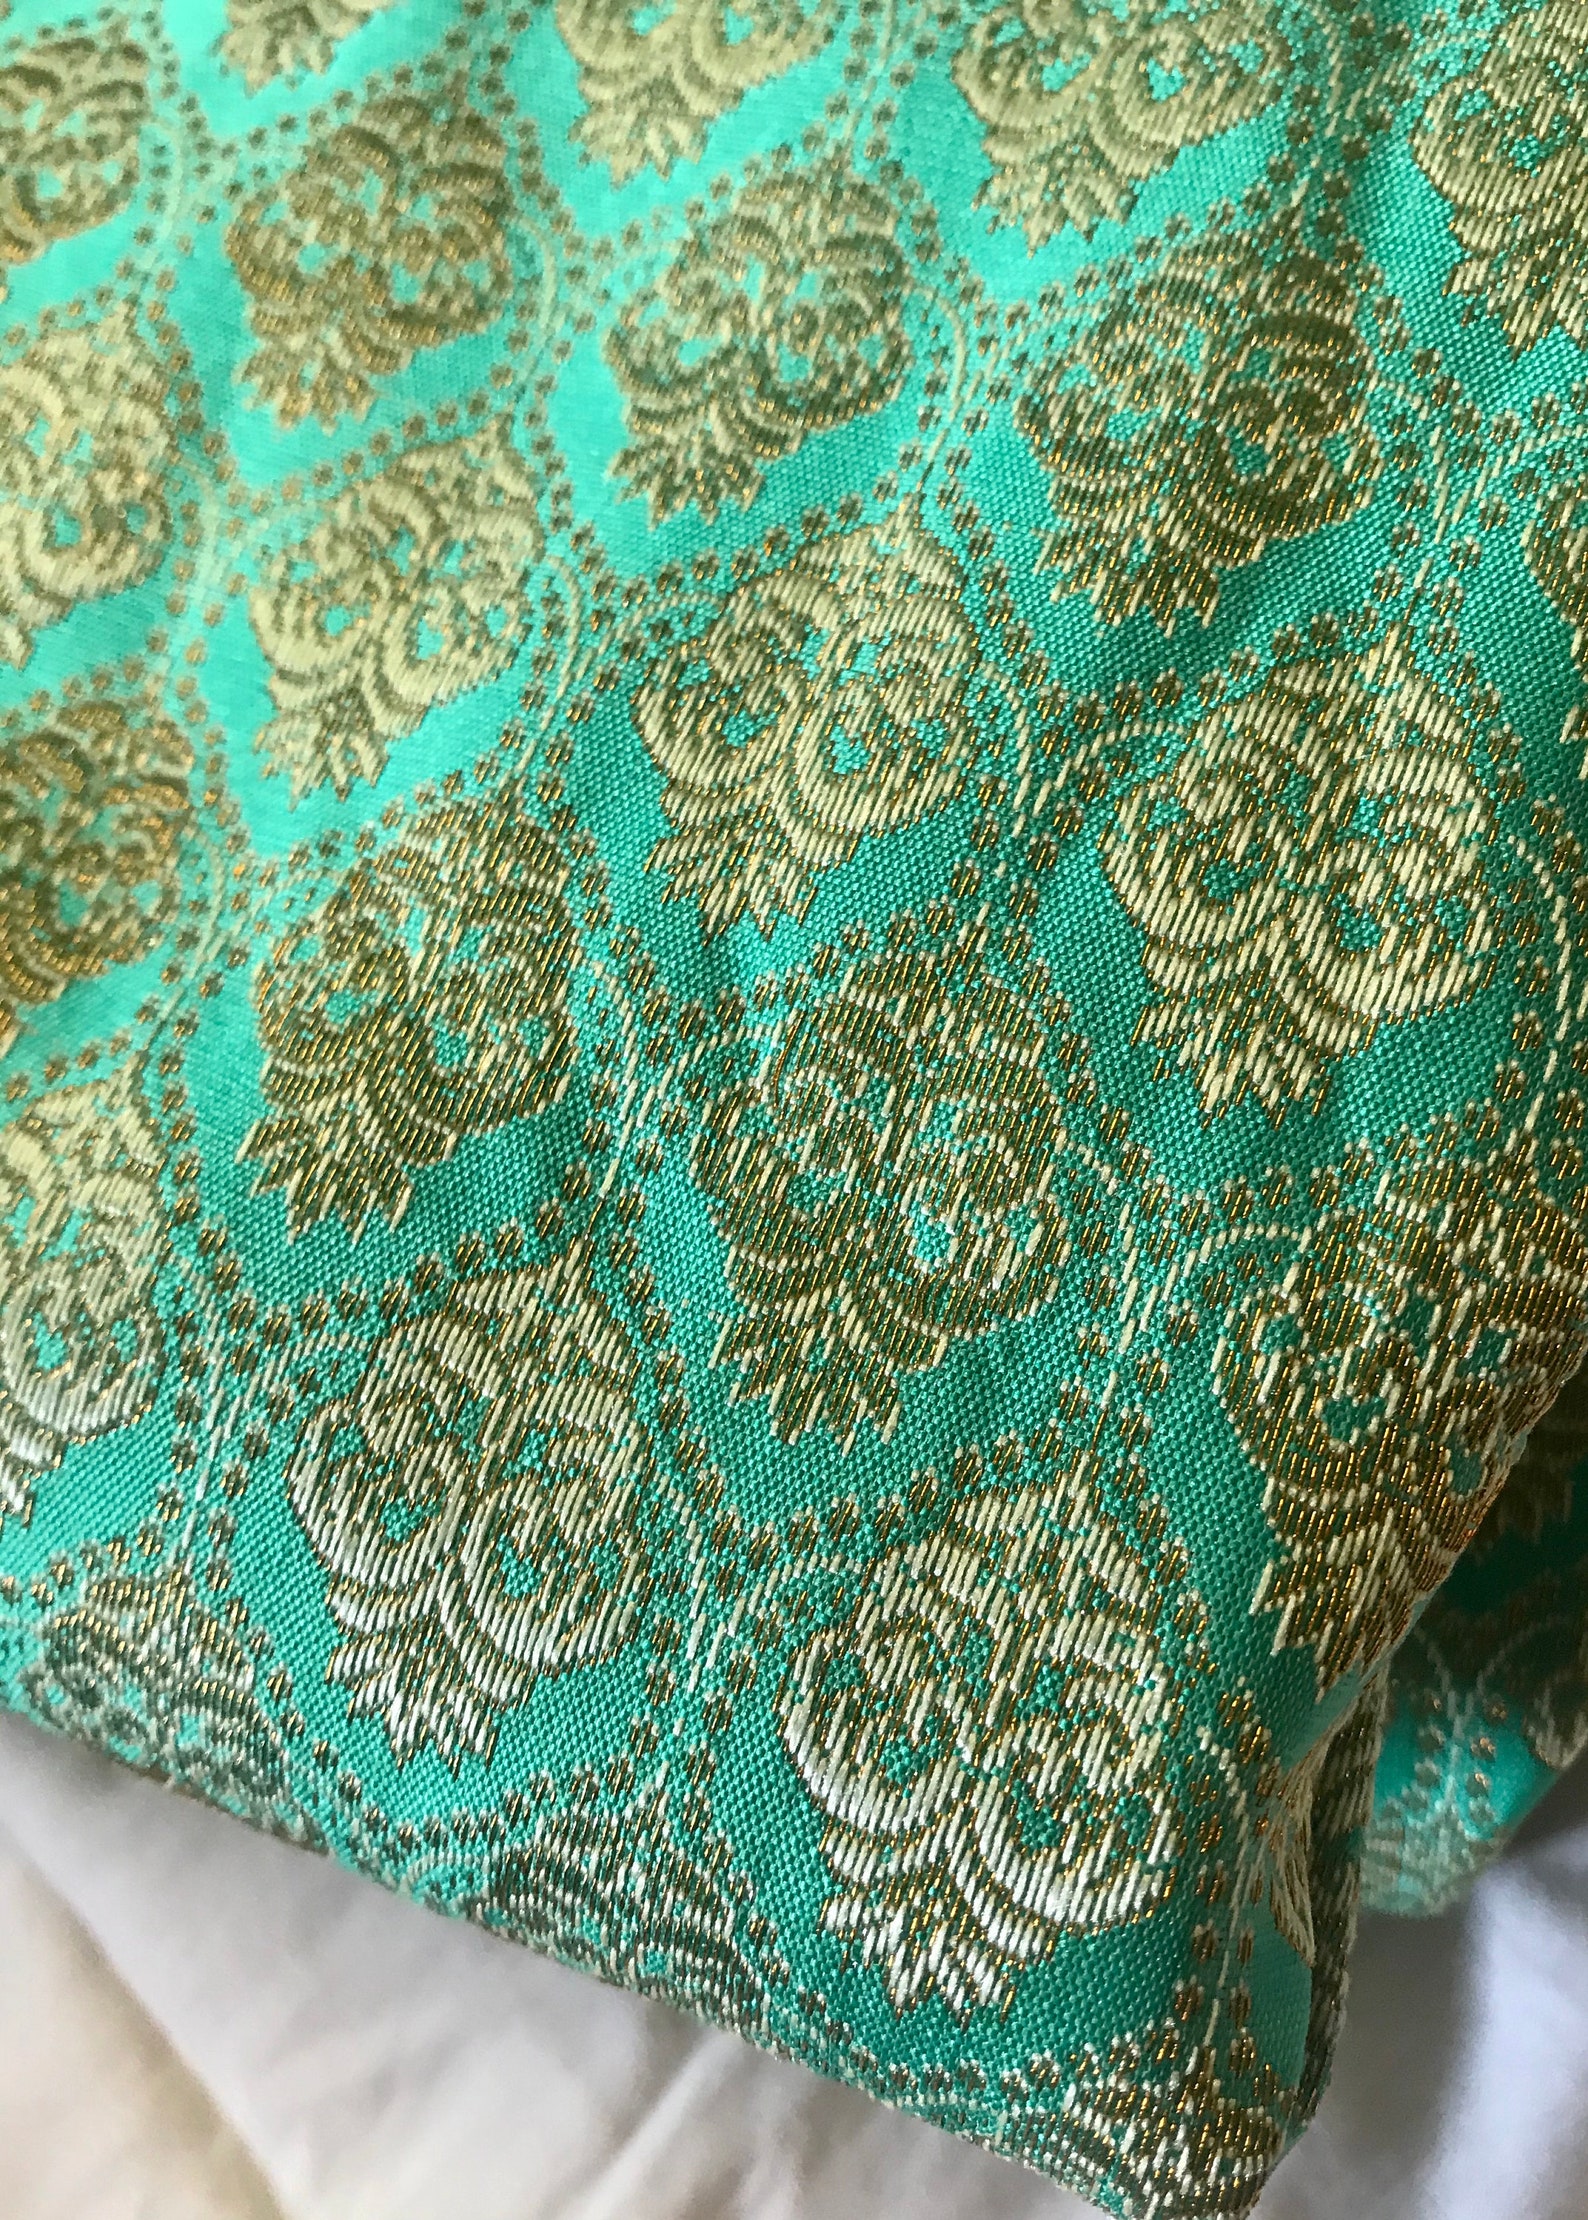 One Yard of Turquoise Green Indian Brocade Fabric in a Regal - Etsy UK